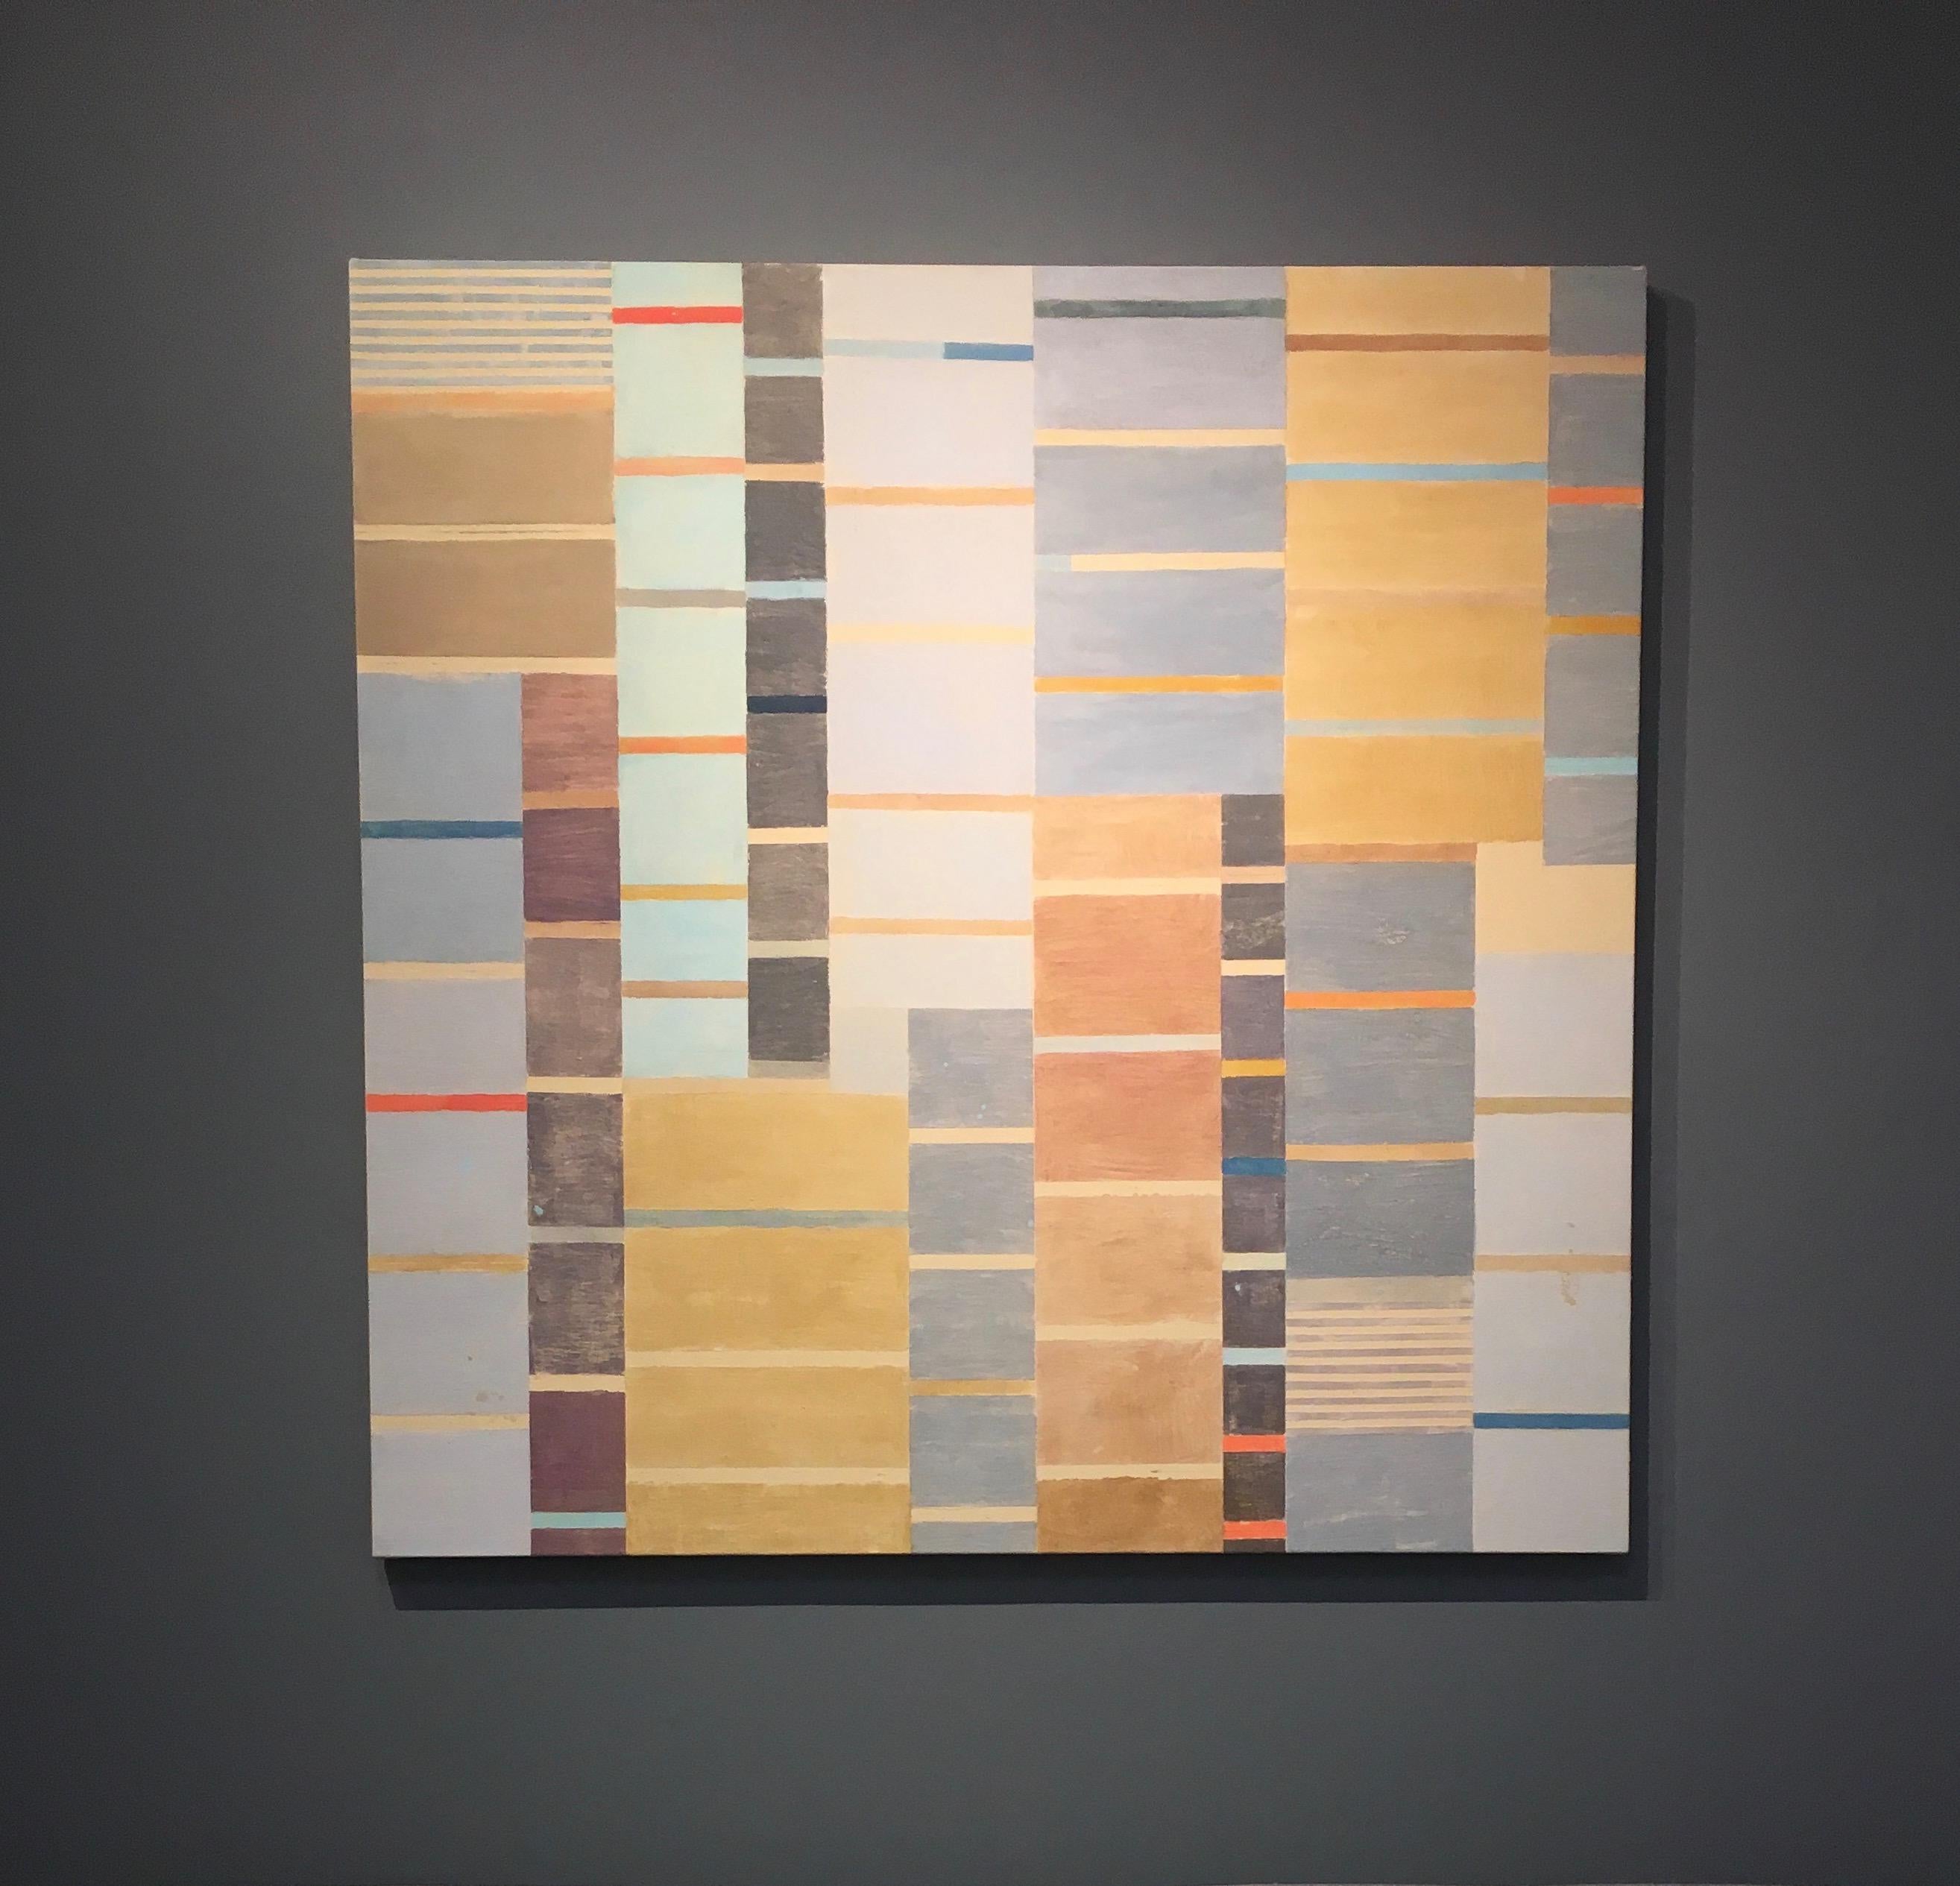 Clean and precise, carefully ordered stripes and blocks of color in pale mint green, light blue, brown, beige and burnt orange complement the soft gray and beige background. Signed, dated and titled on verso.

Elizabeth Gourlay’s work is a